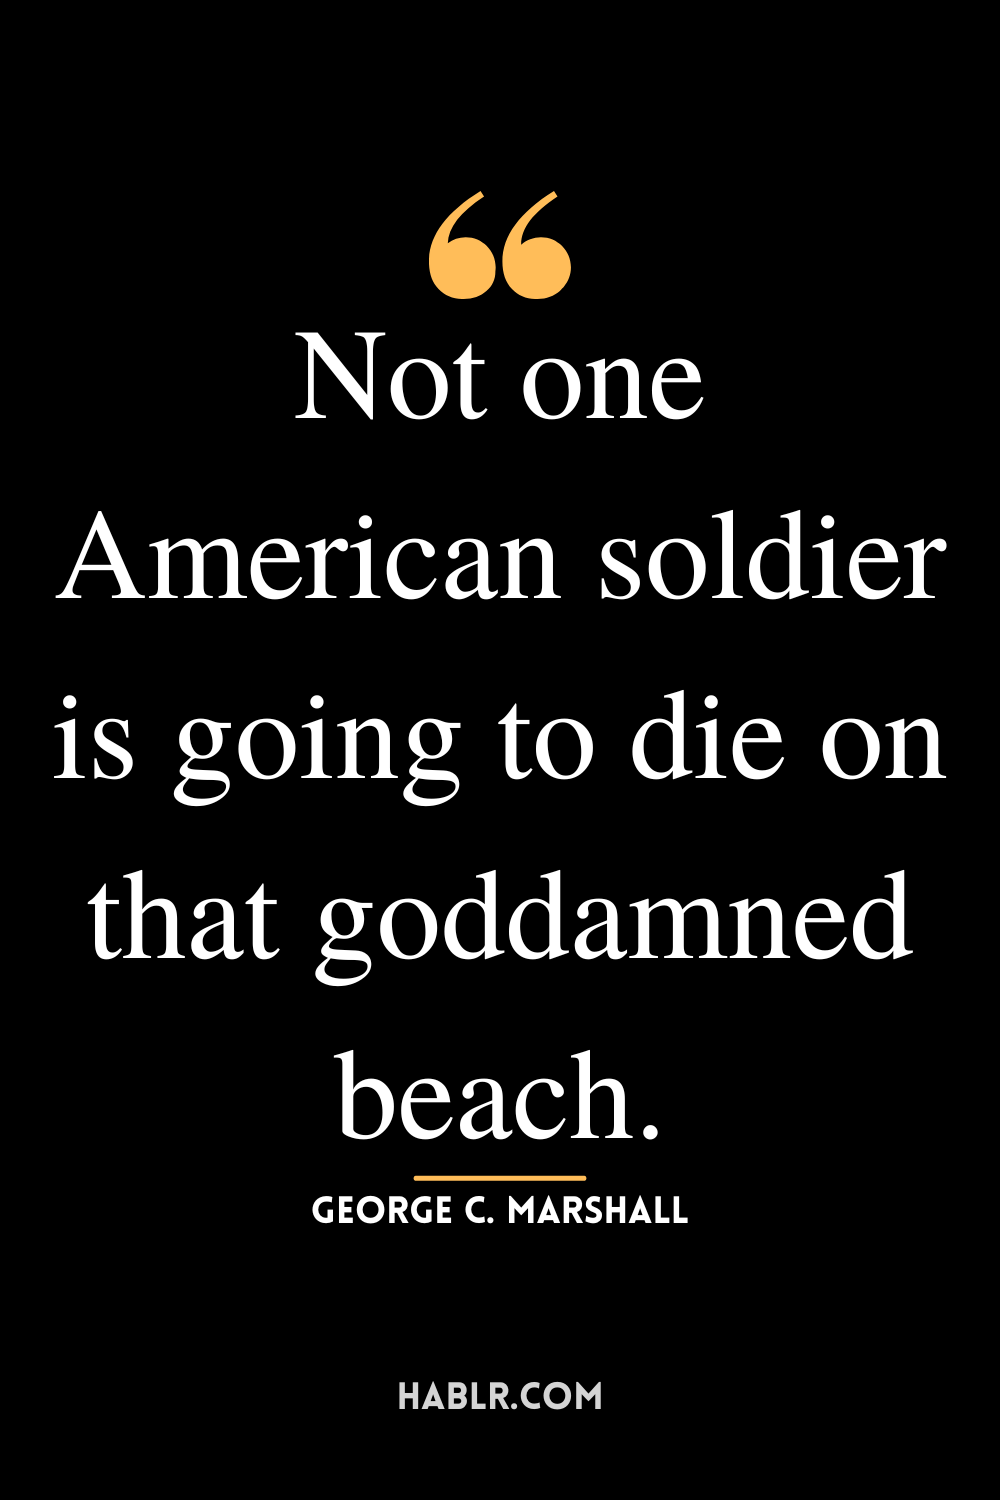 “Not one American soldier is going to die on that goddamned beach.” -George C. Marshall